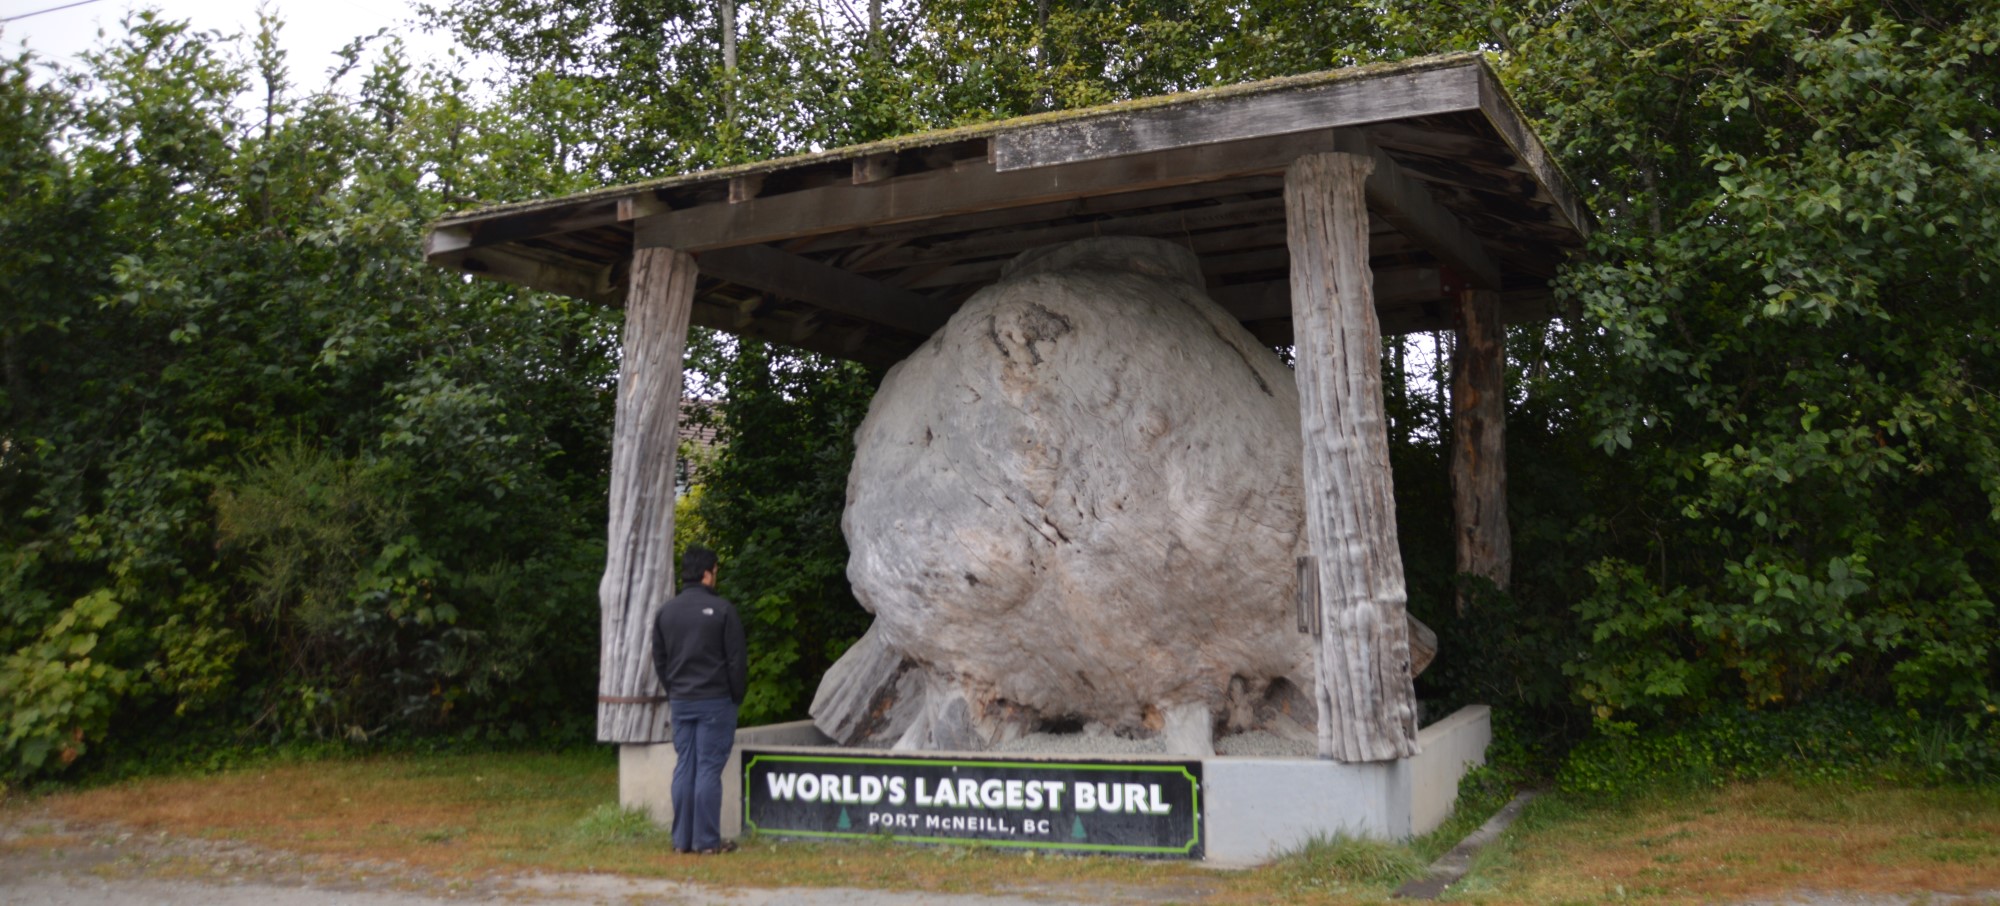 British Columbia’s Biggest Attractions Are Often in the Smallest Places